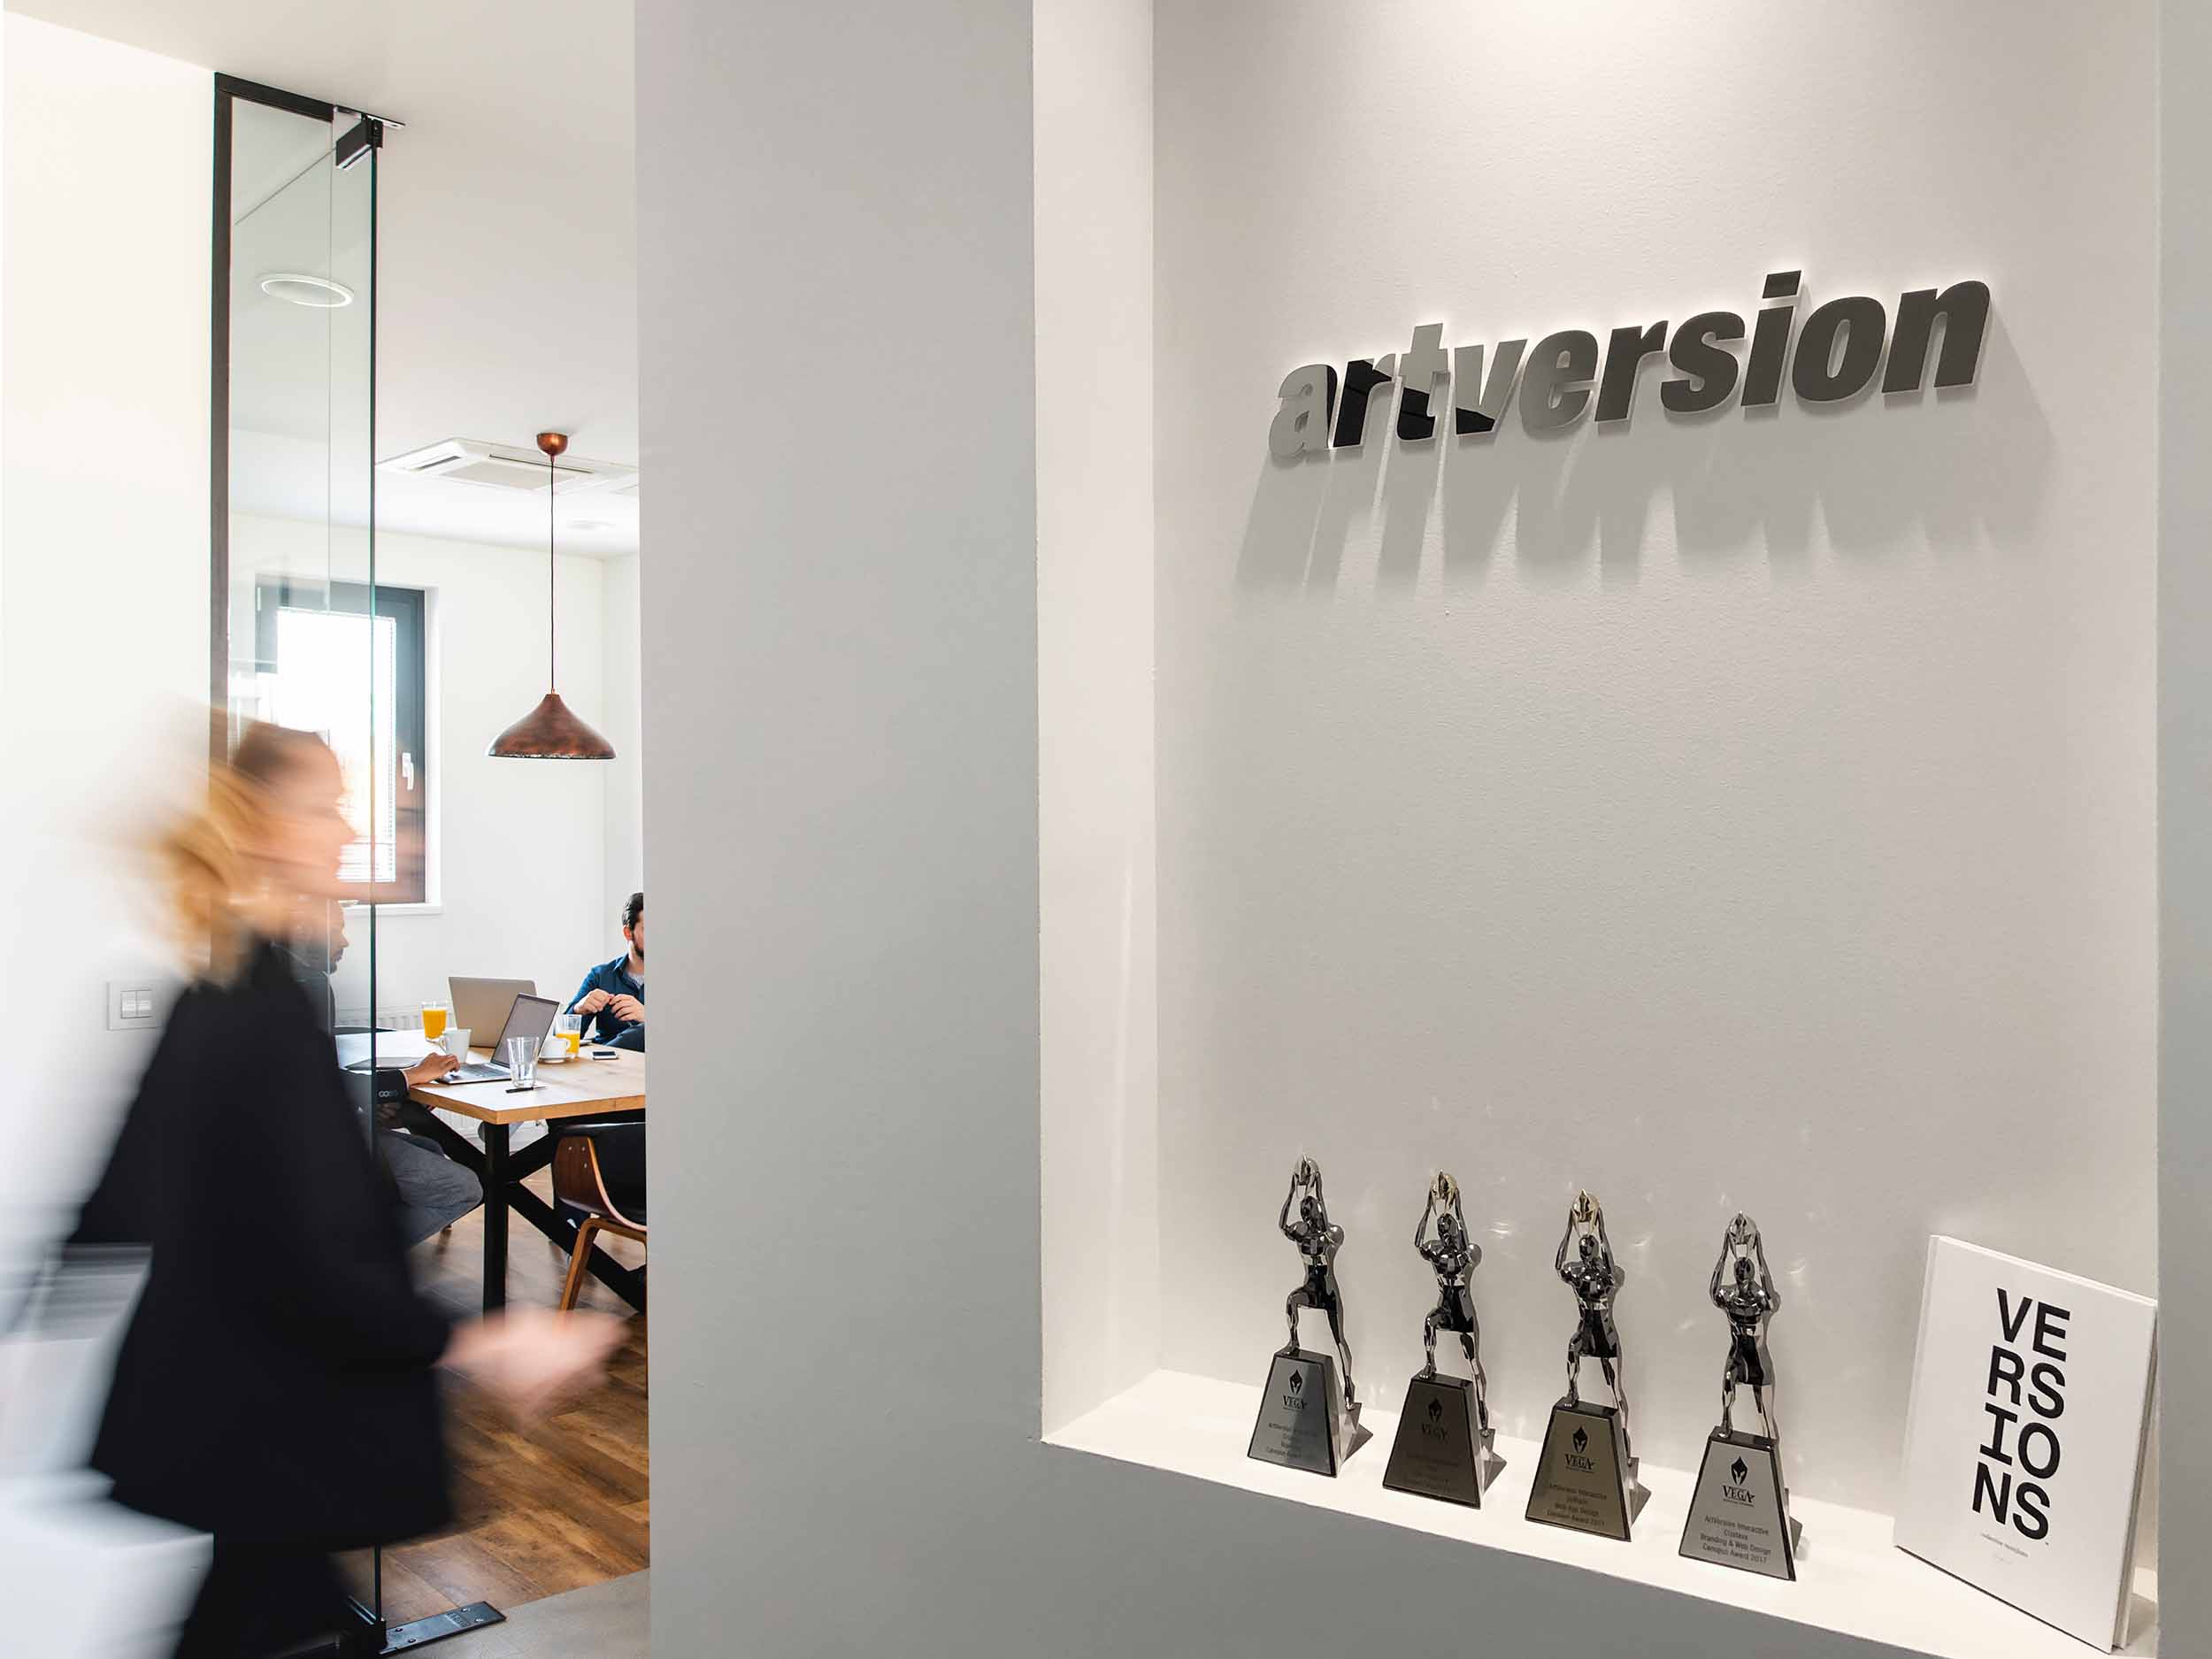 Chicago creative agency ArtVersion logo on the wall with awards beneath it.